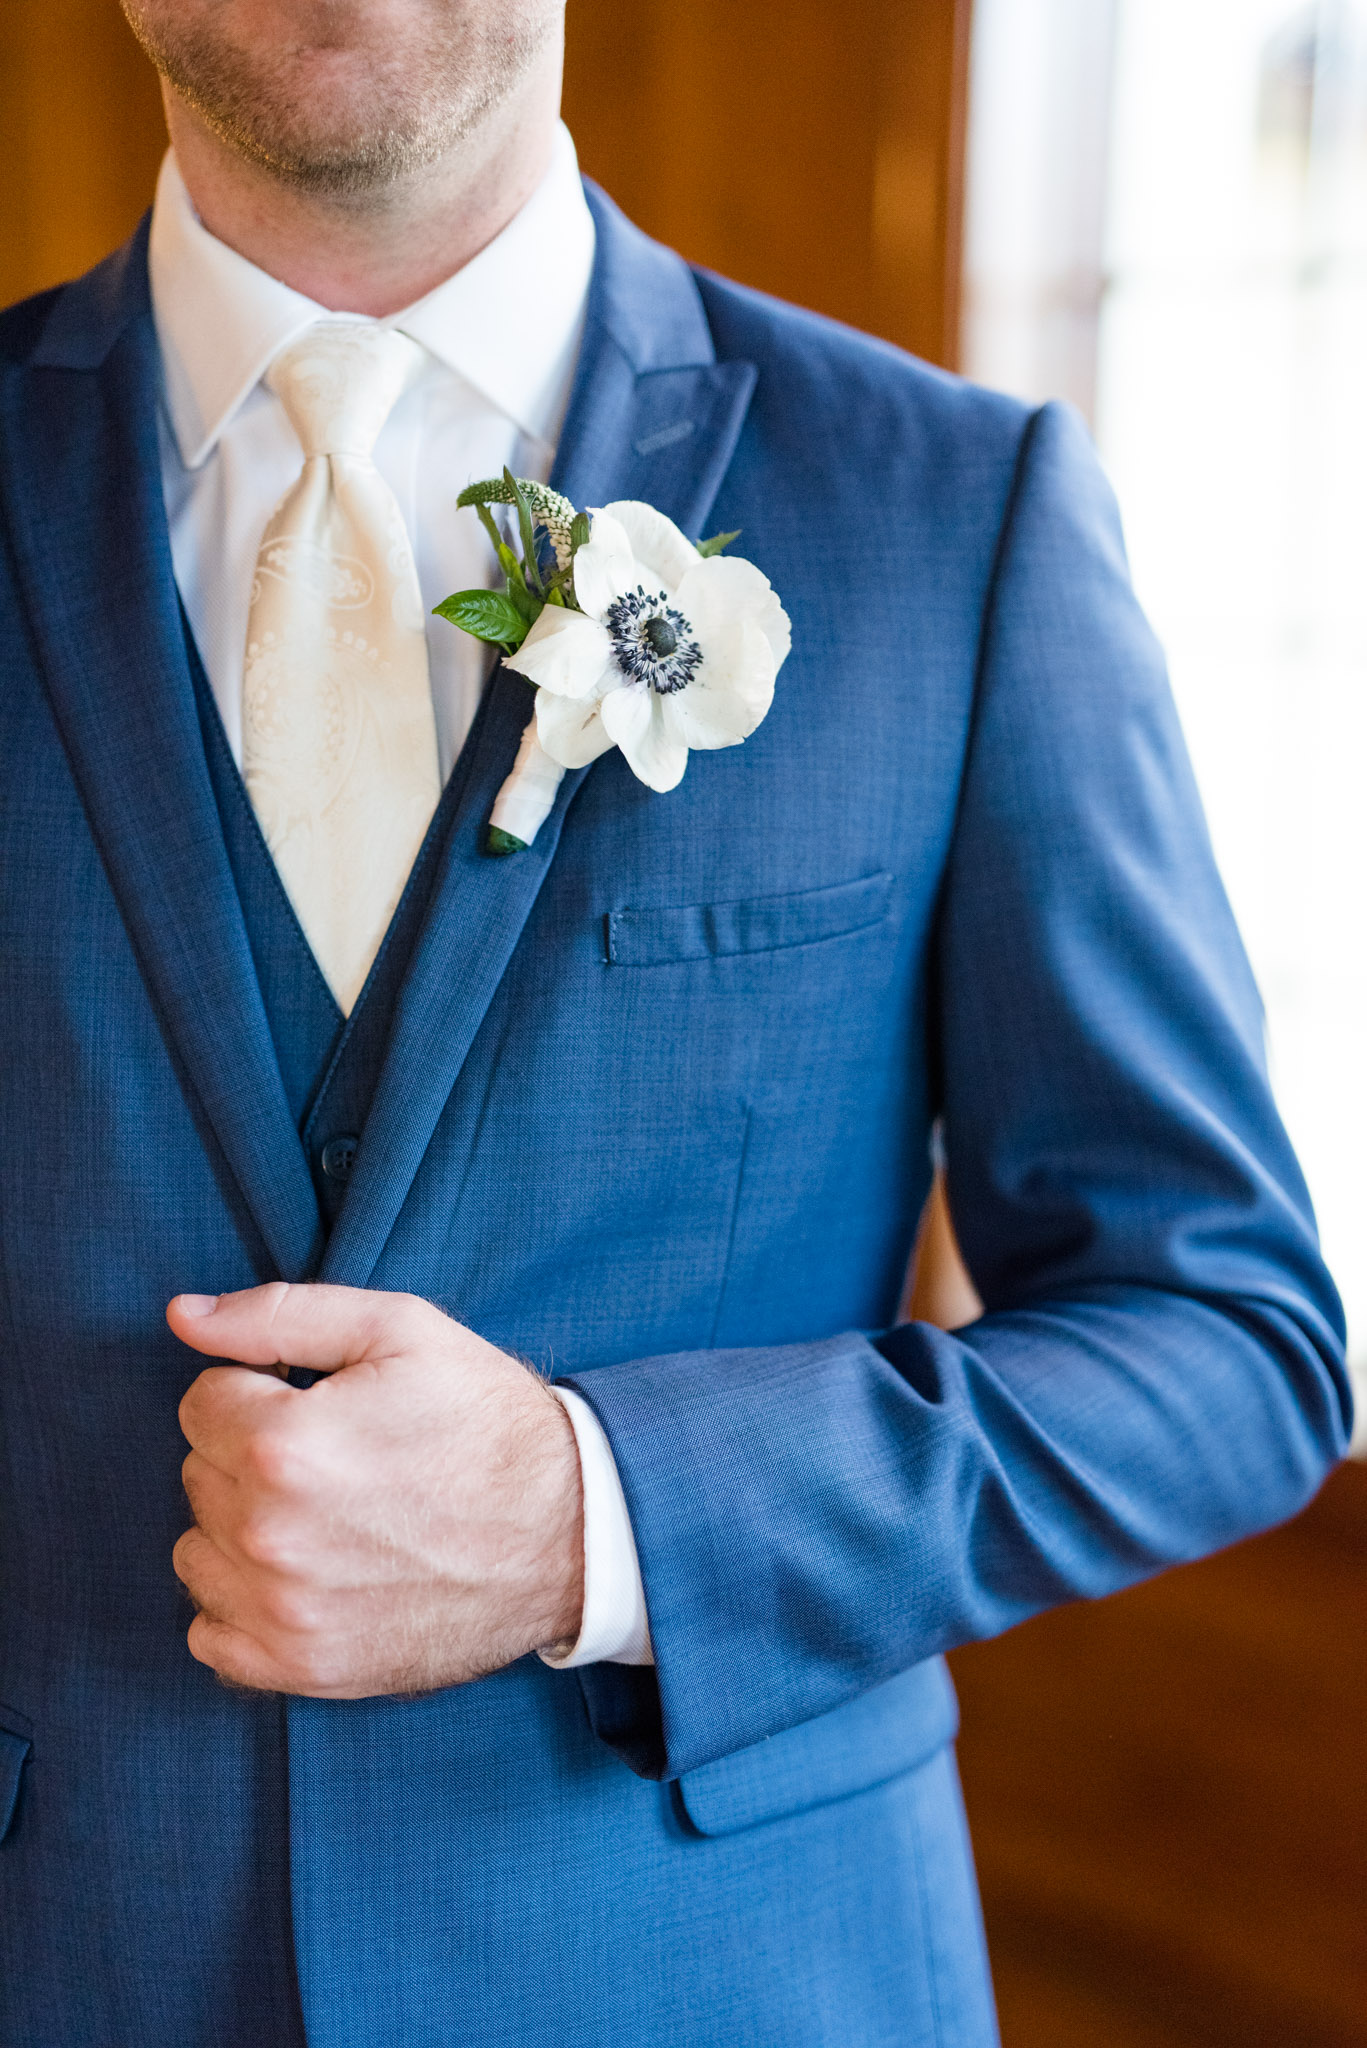 Groom's boutonniere on his jacket.